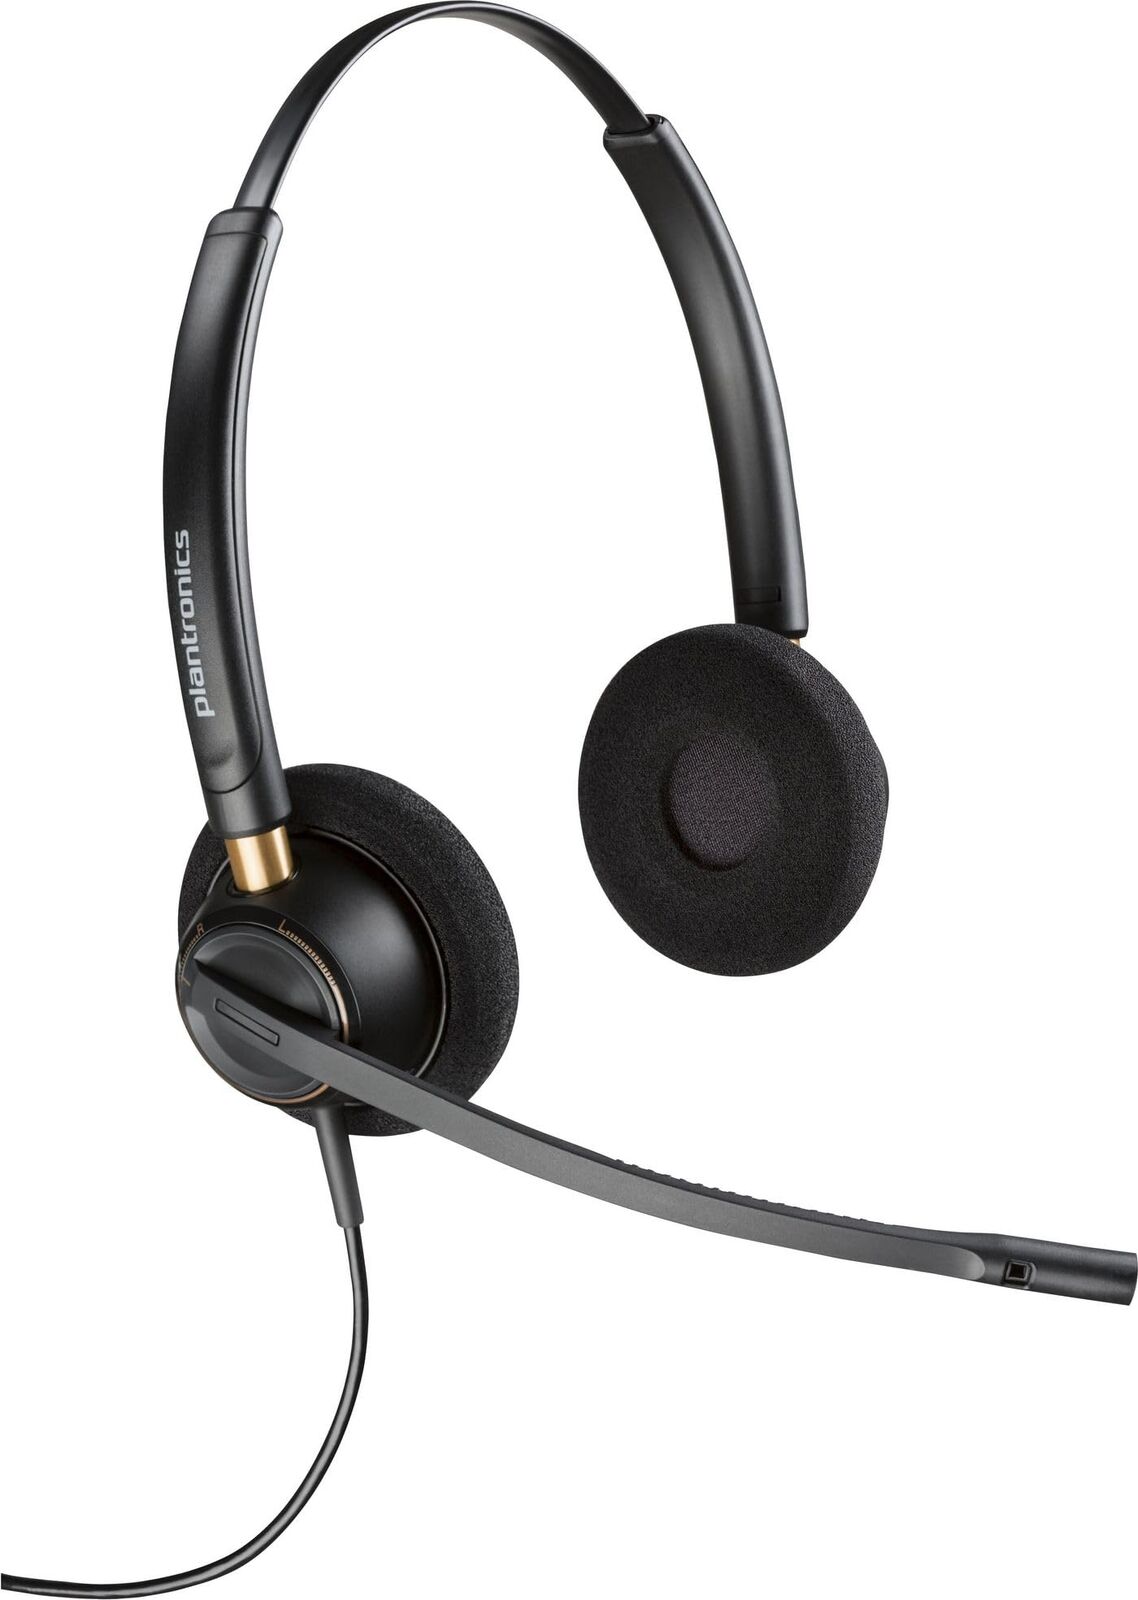 Poly EncorePro HW520D Headset - Stereo - Wired - On-ear - Binaural - Ear-cup -